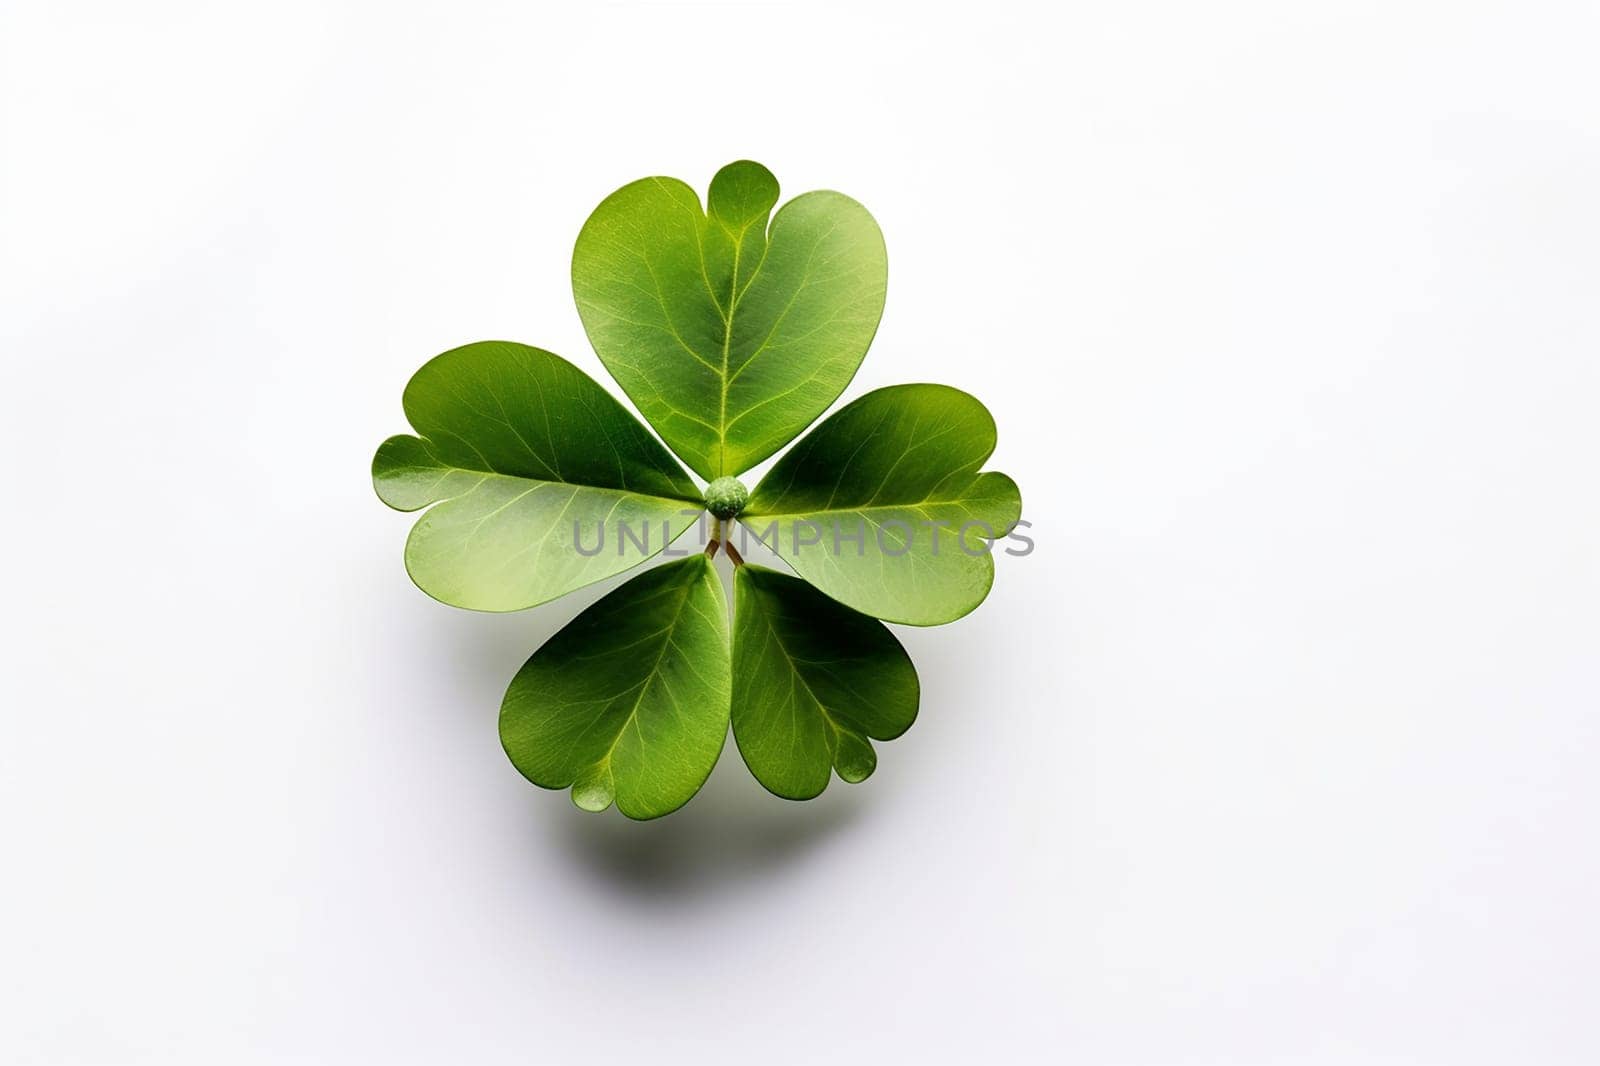 A photograph of a green clover with four leaves isolated on a white background. by Hype2art